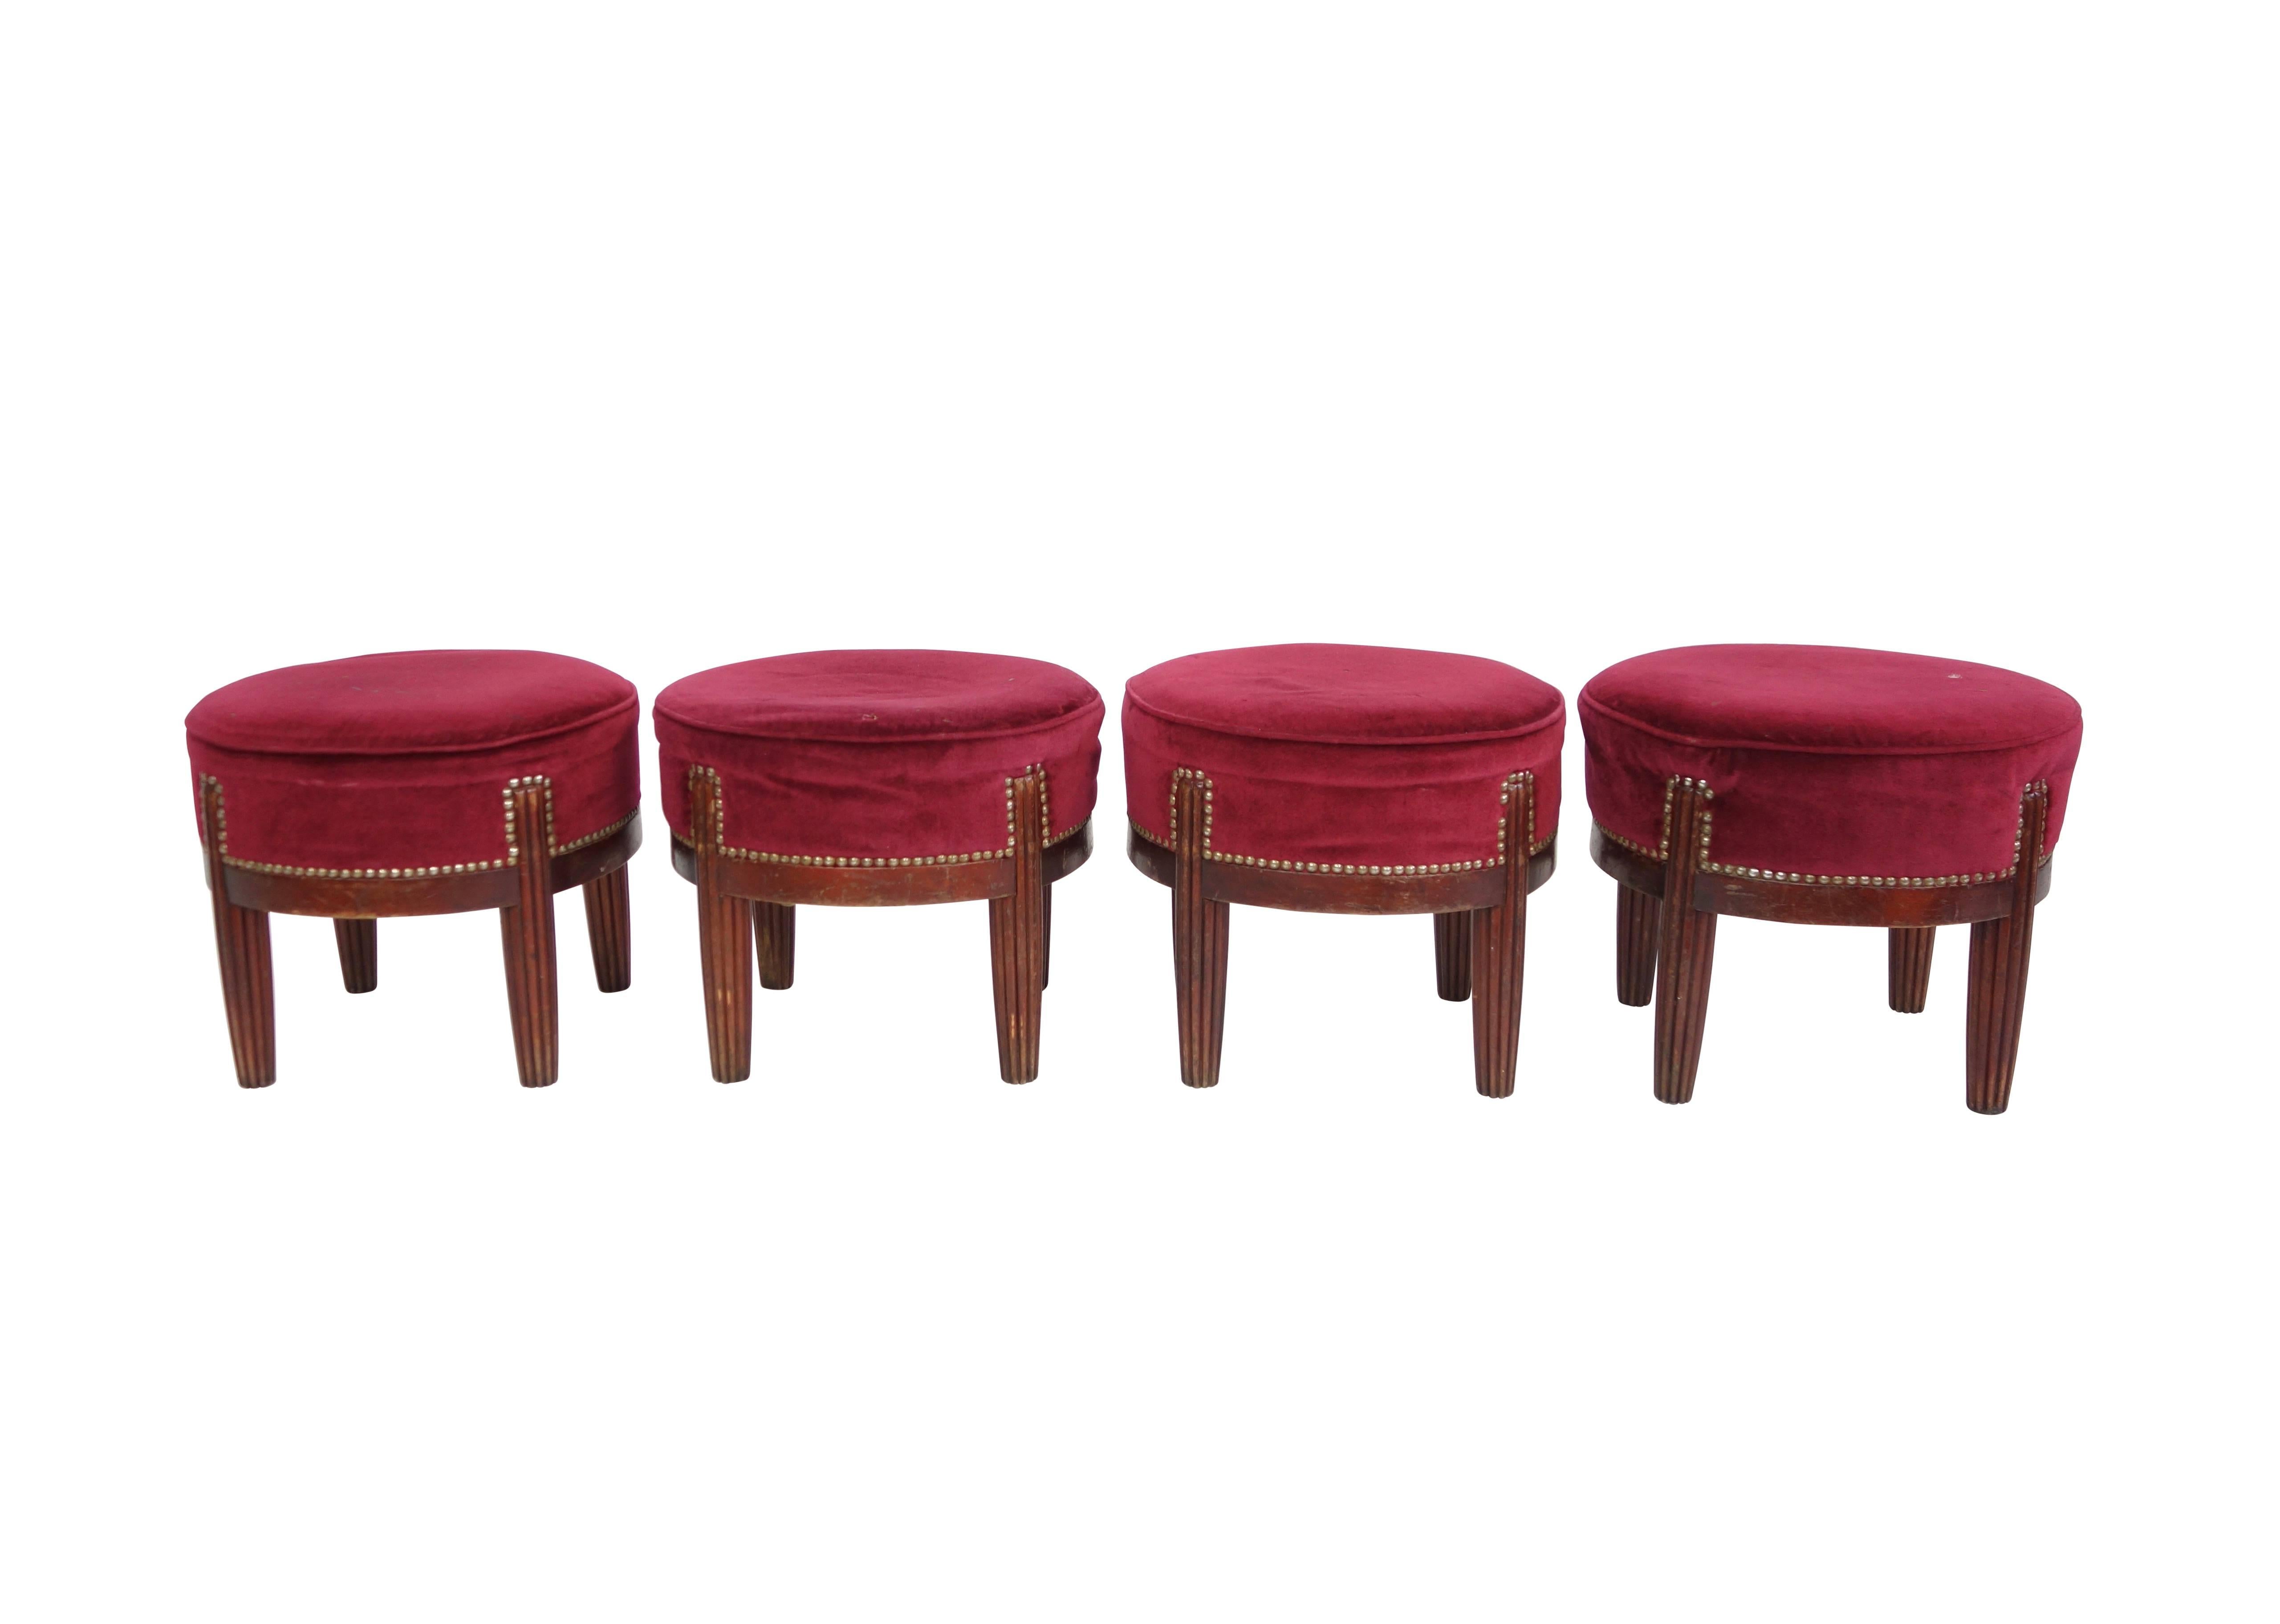 This is a petite riveted red velvet footstool from France, circa 1930. Four available, sold individually.